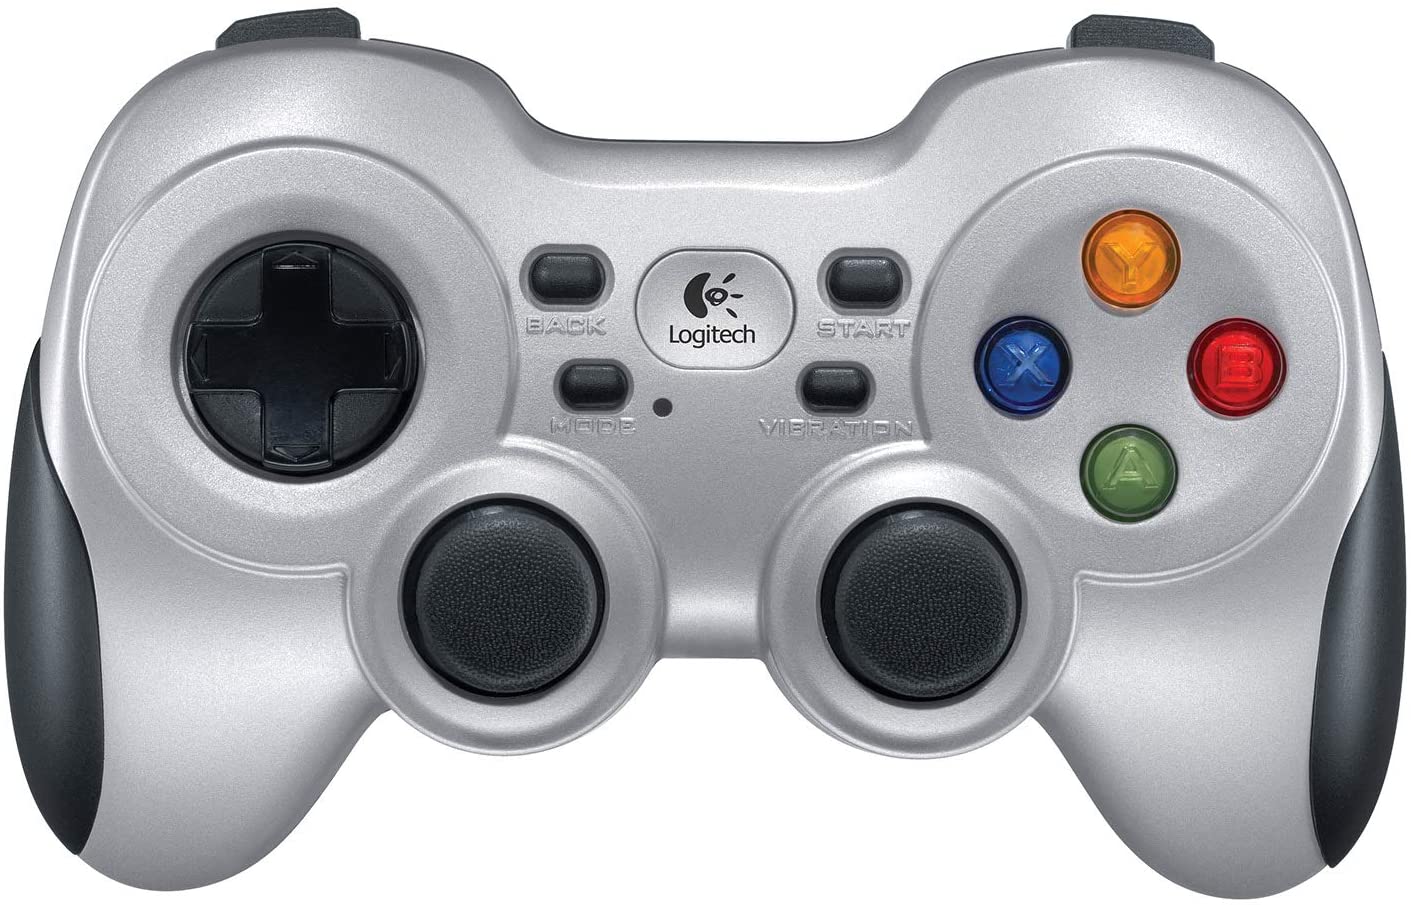 F710 WIRELESS GAMEPAD For Sale in Trinidad